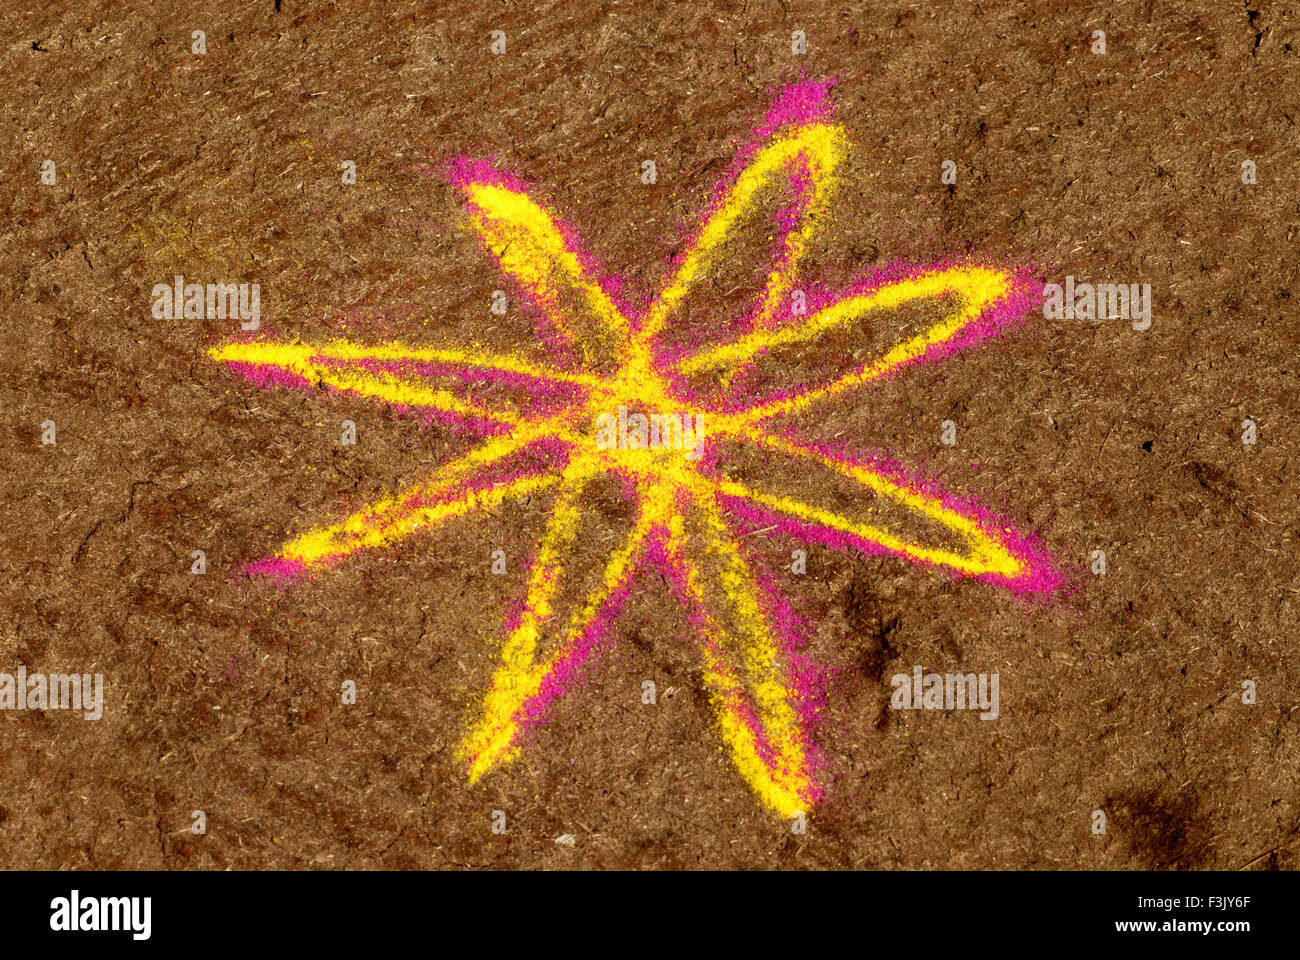 Star Floor Design Drawn With Colored Powder On Cow Dung Flooring